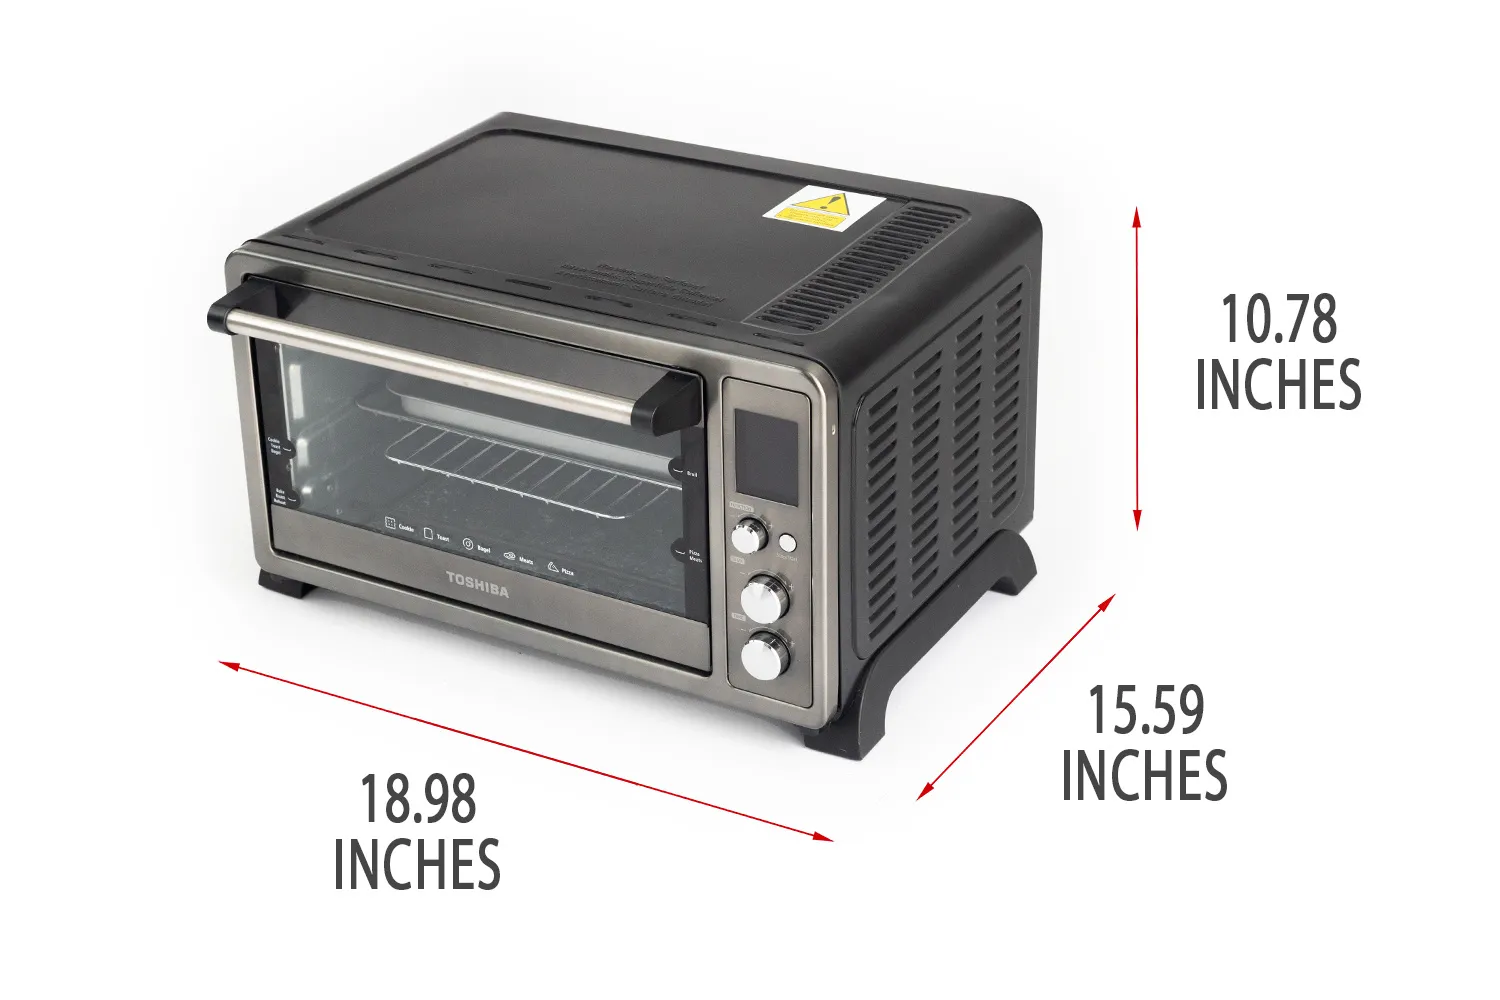 Toshiba AC25CEW-BS Digital Toaster Oven with Convection cooking